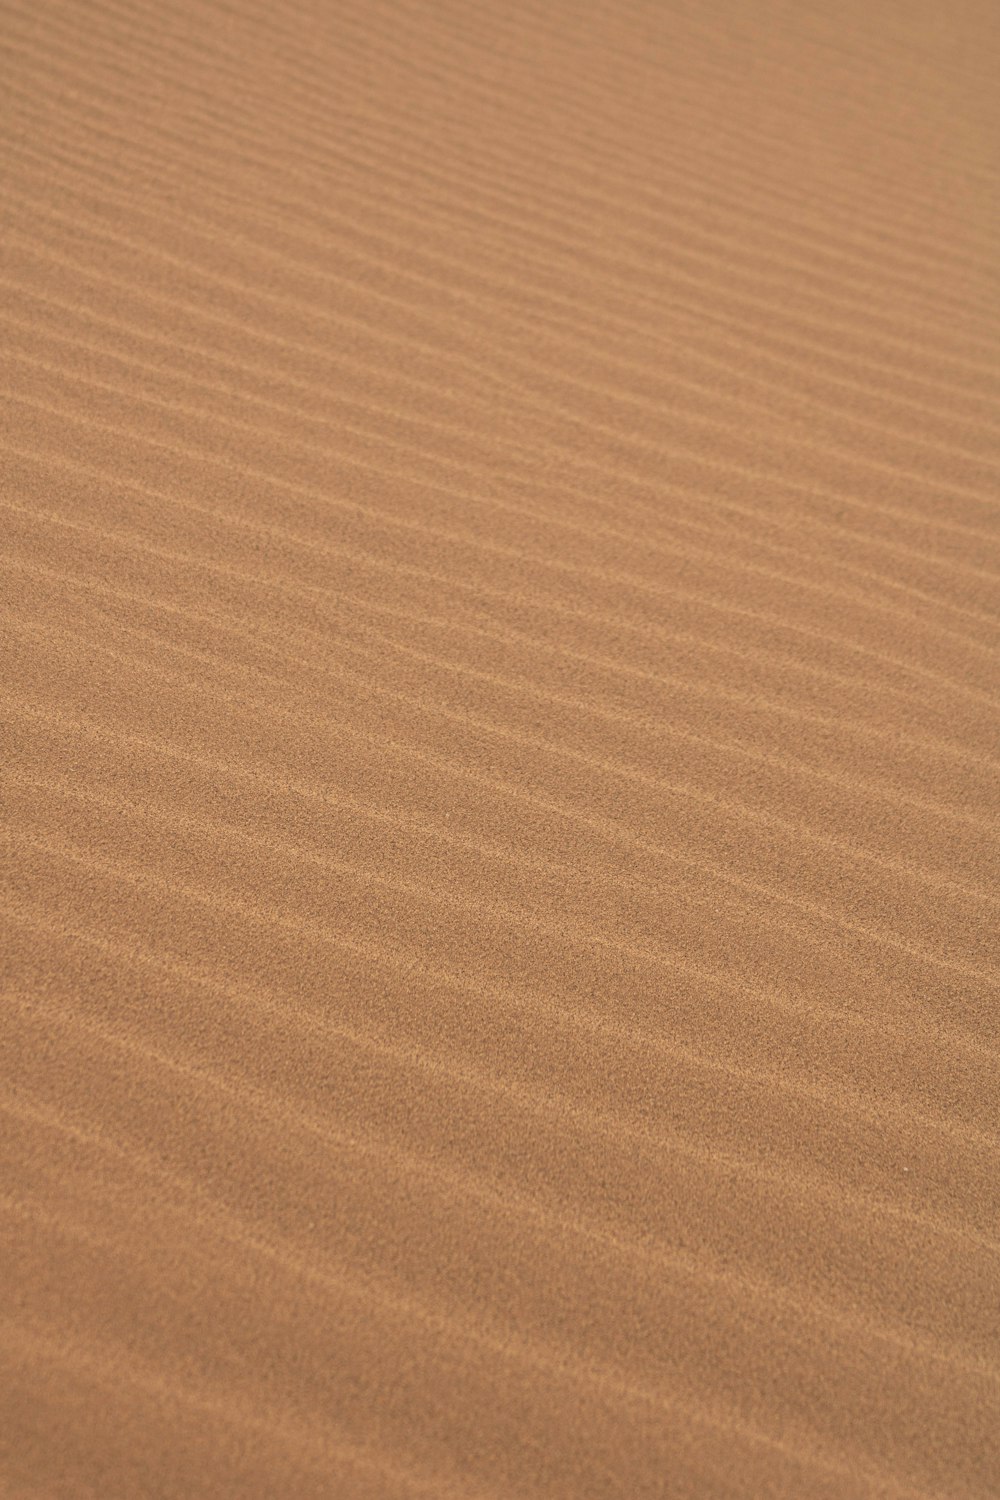 a bird is standing in the middle of a desert